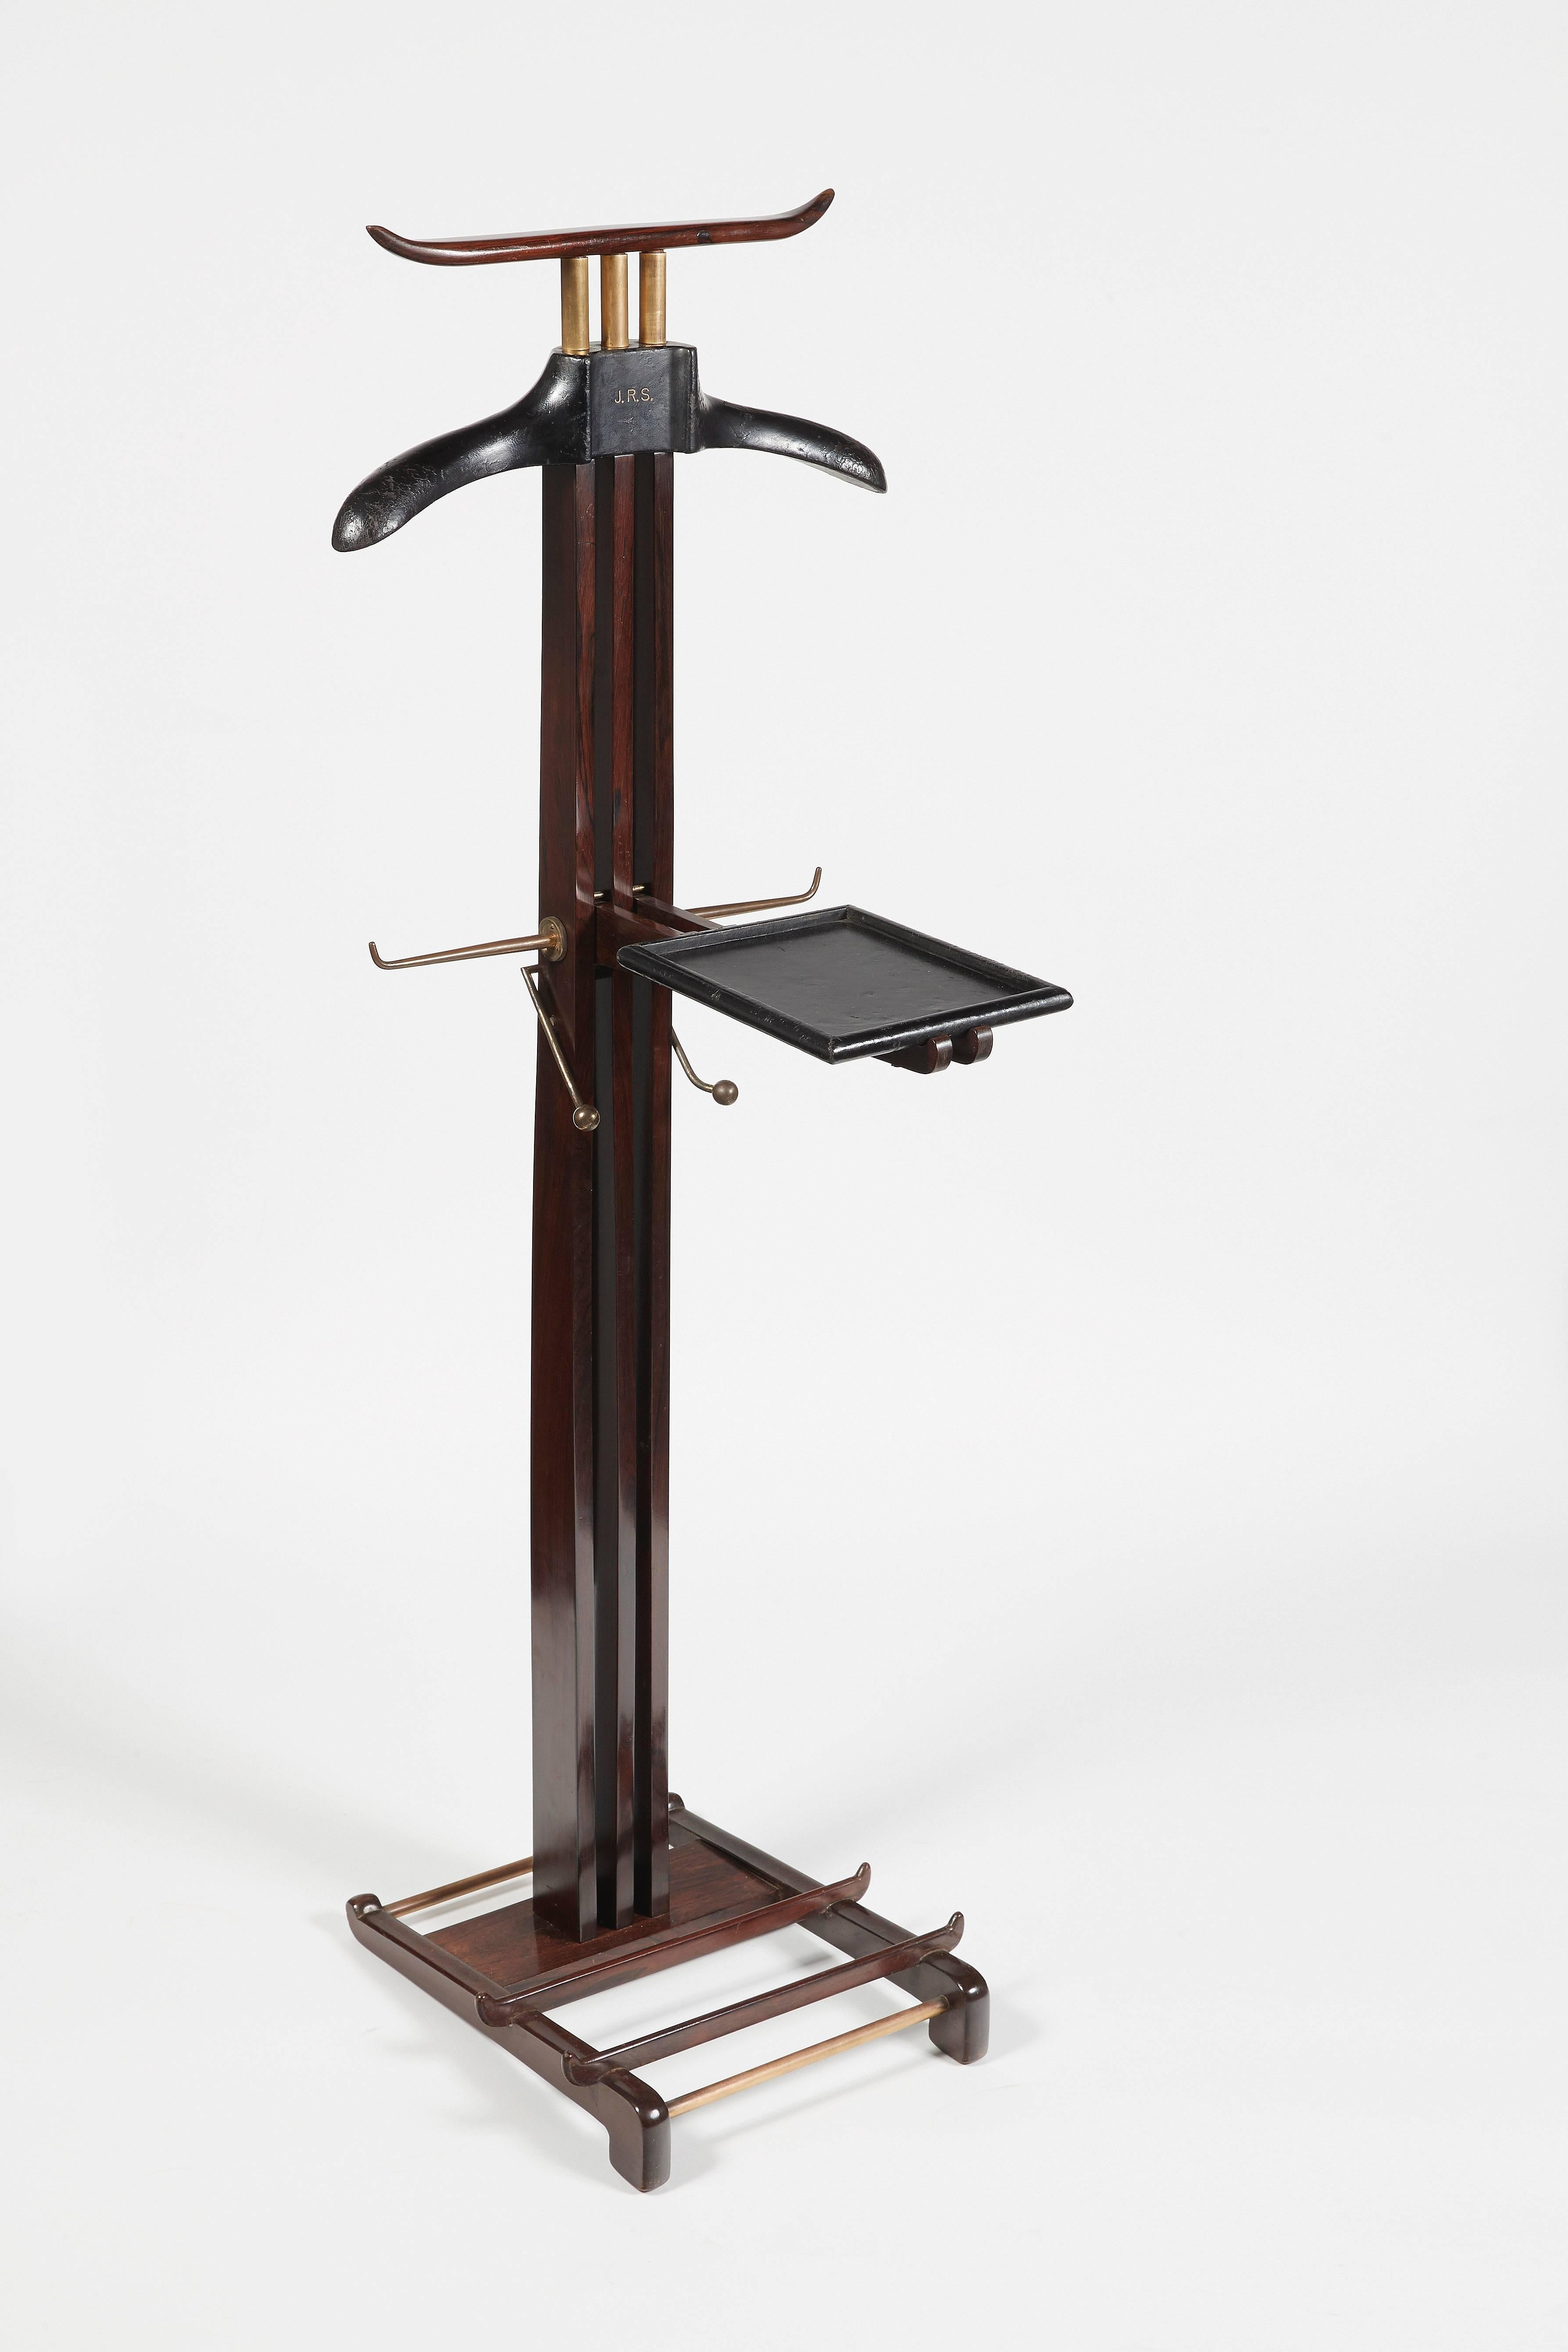 Night valet with coat rack and removable shelf entirely covered in black leather, held in varnished wood uprights and ending with tubular brass crosspieces forming shoe racks.

Iconic piece born from the collaboration of Paul Dupré-Lafon and the